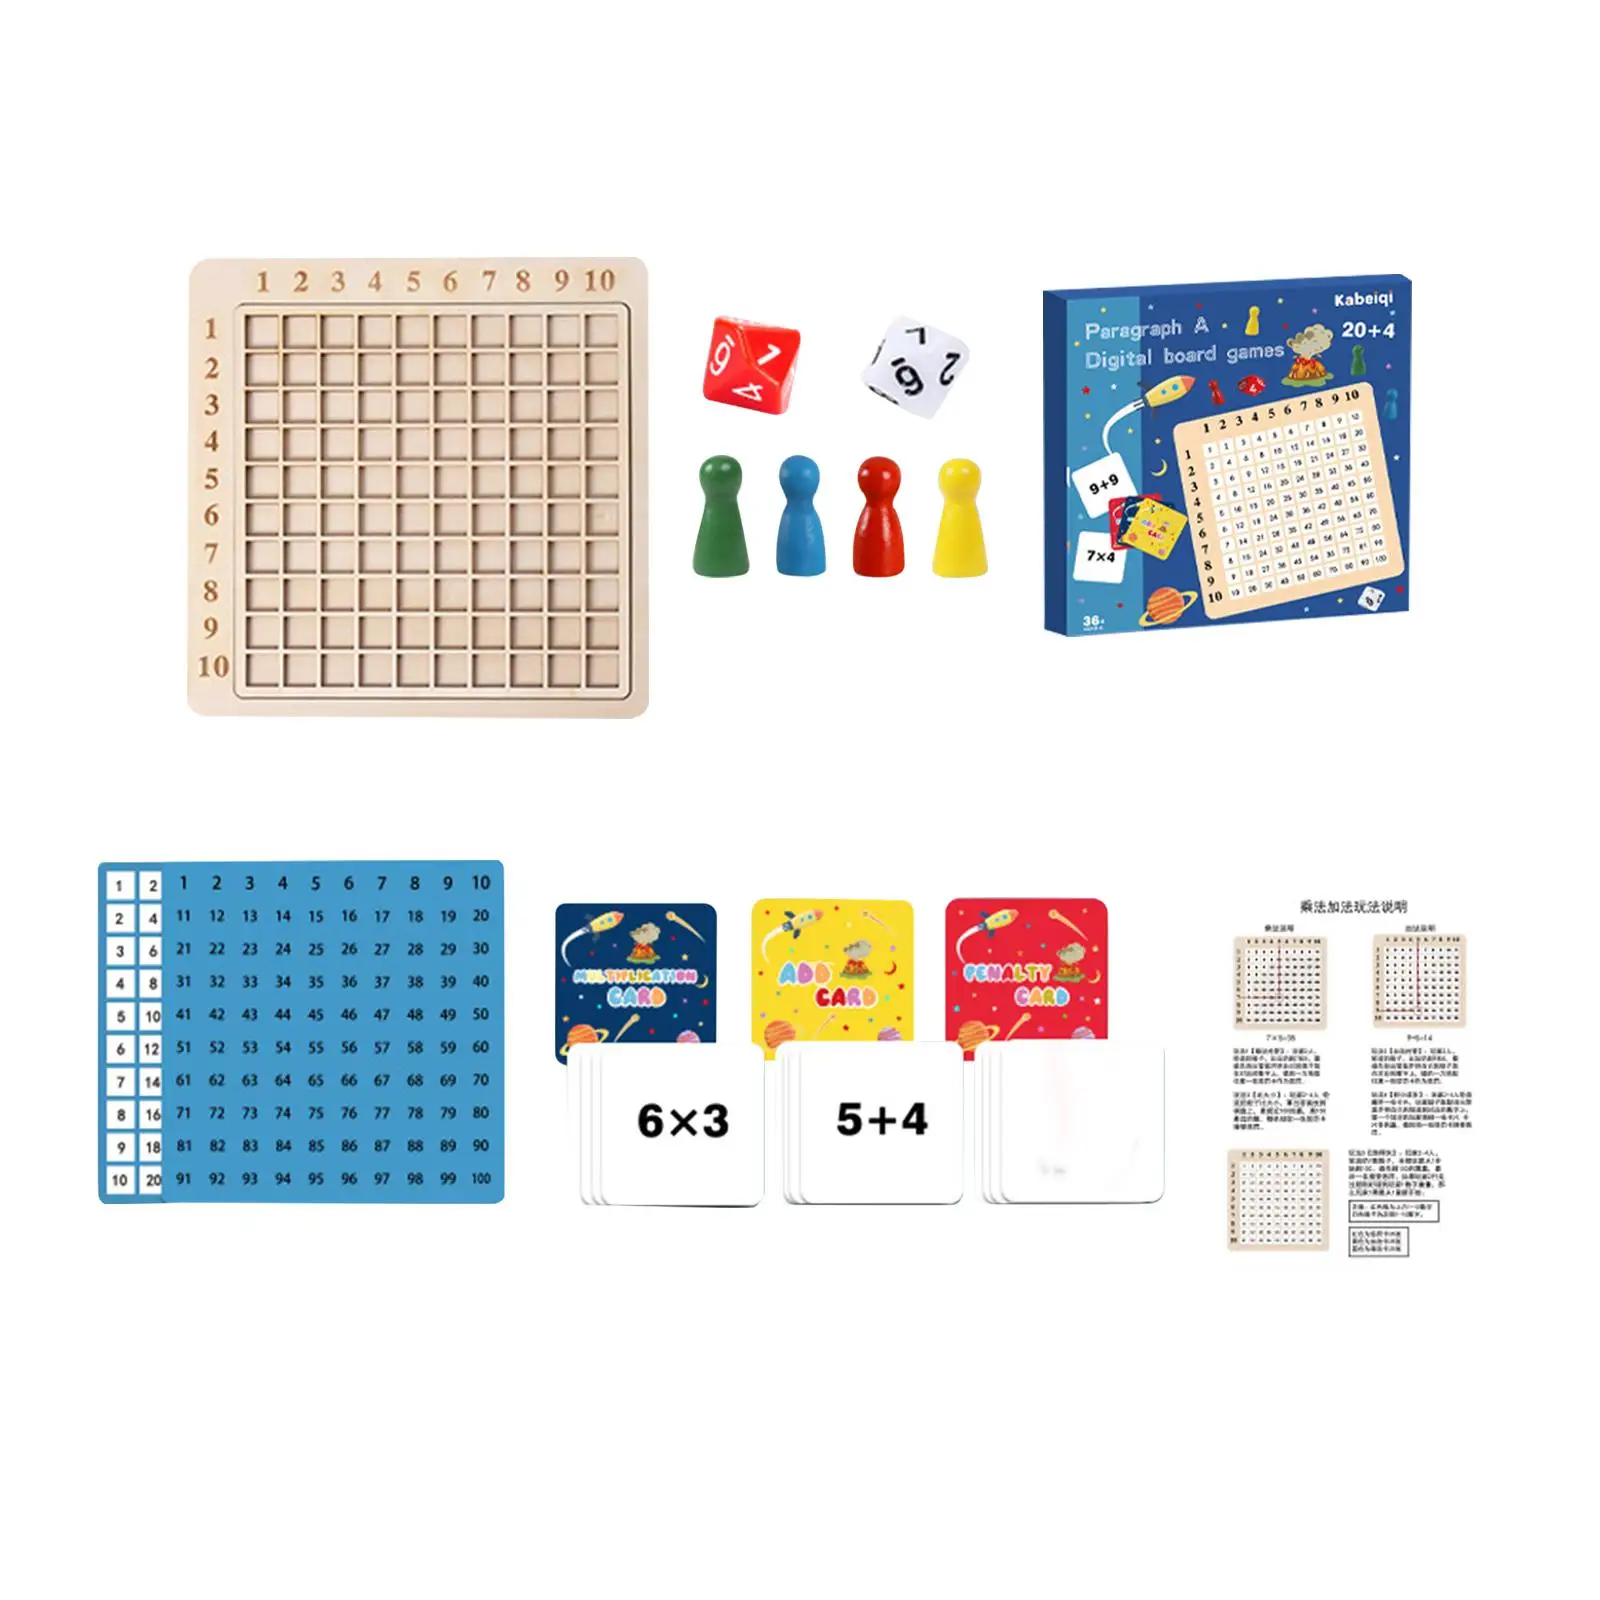 99 Multiplication Table Math Toy Counting Learning for Children Kids